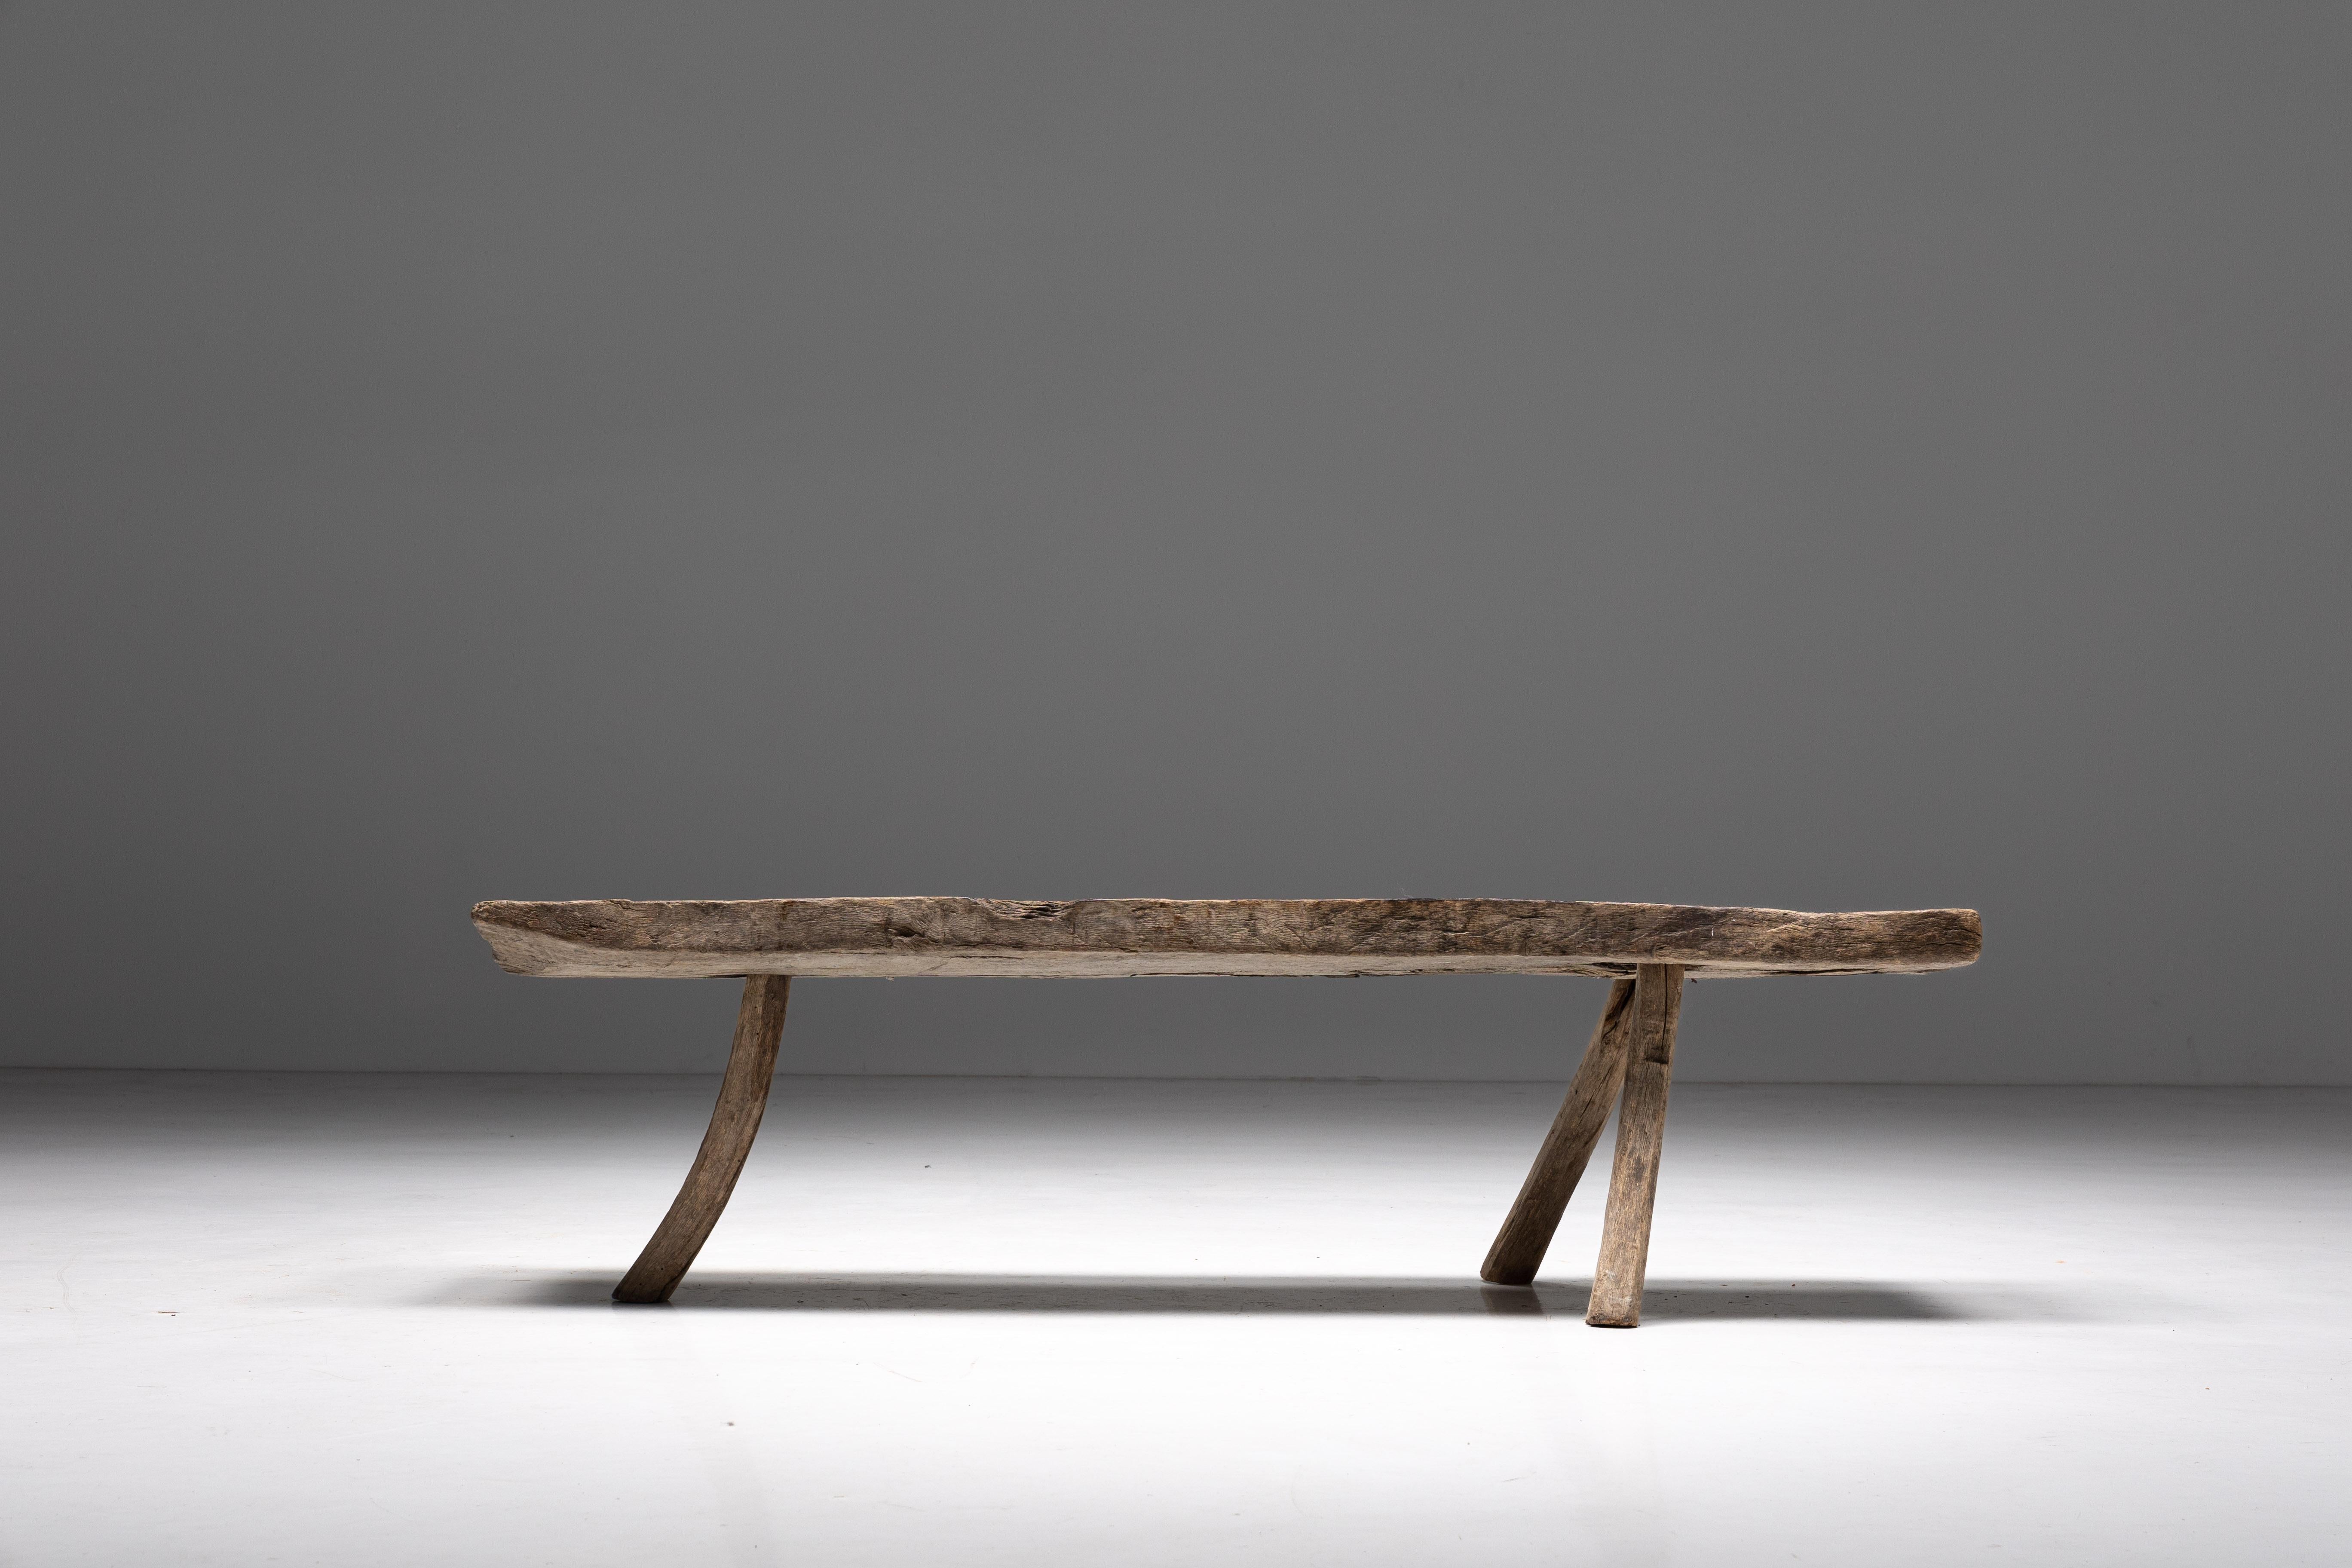 Wood Rustic Tripod Bench, France, 19th Century For Sale